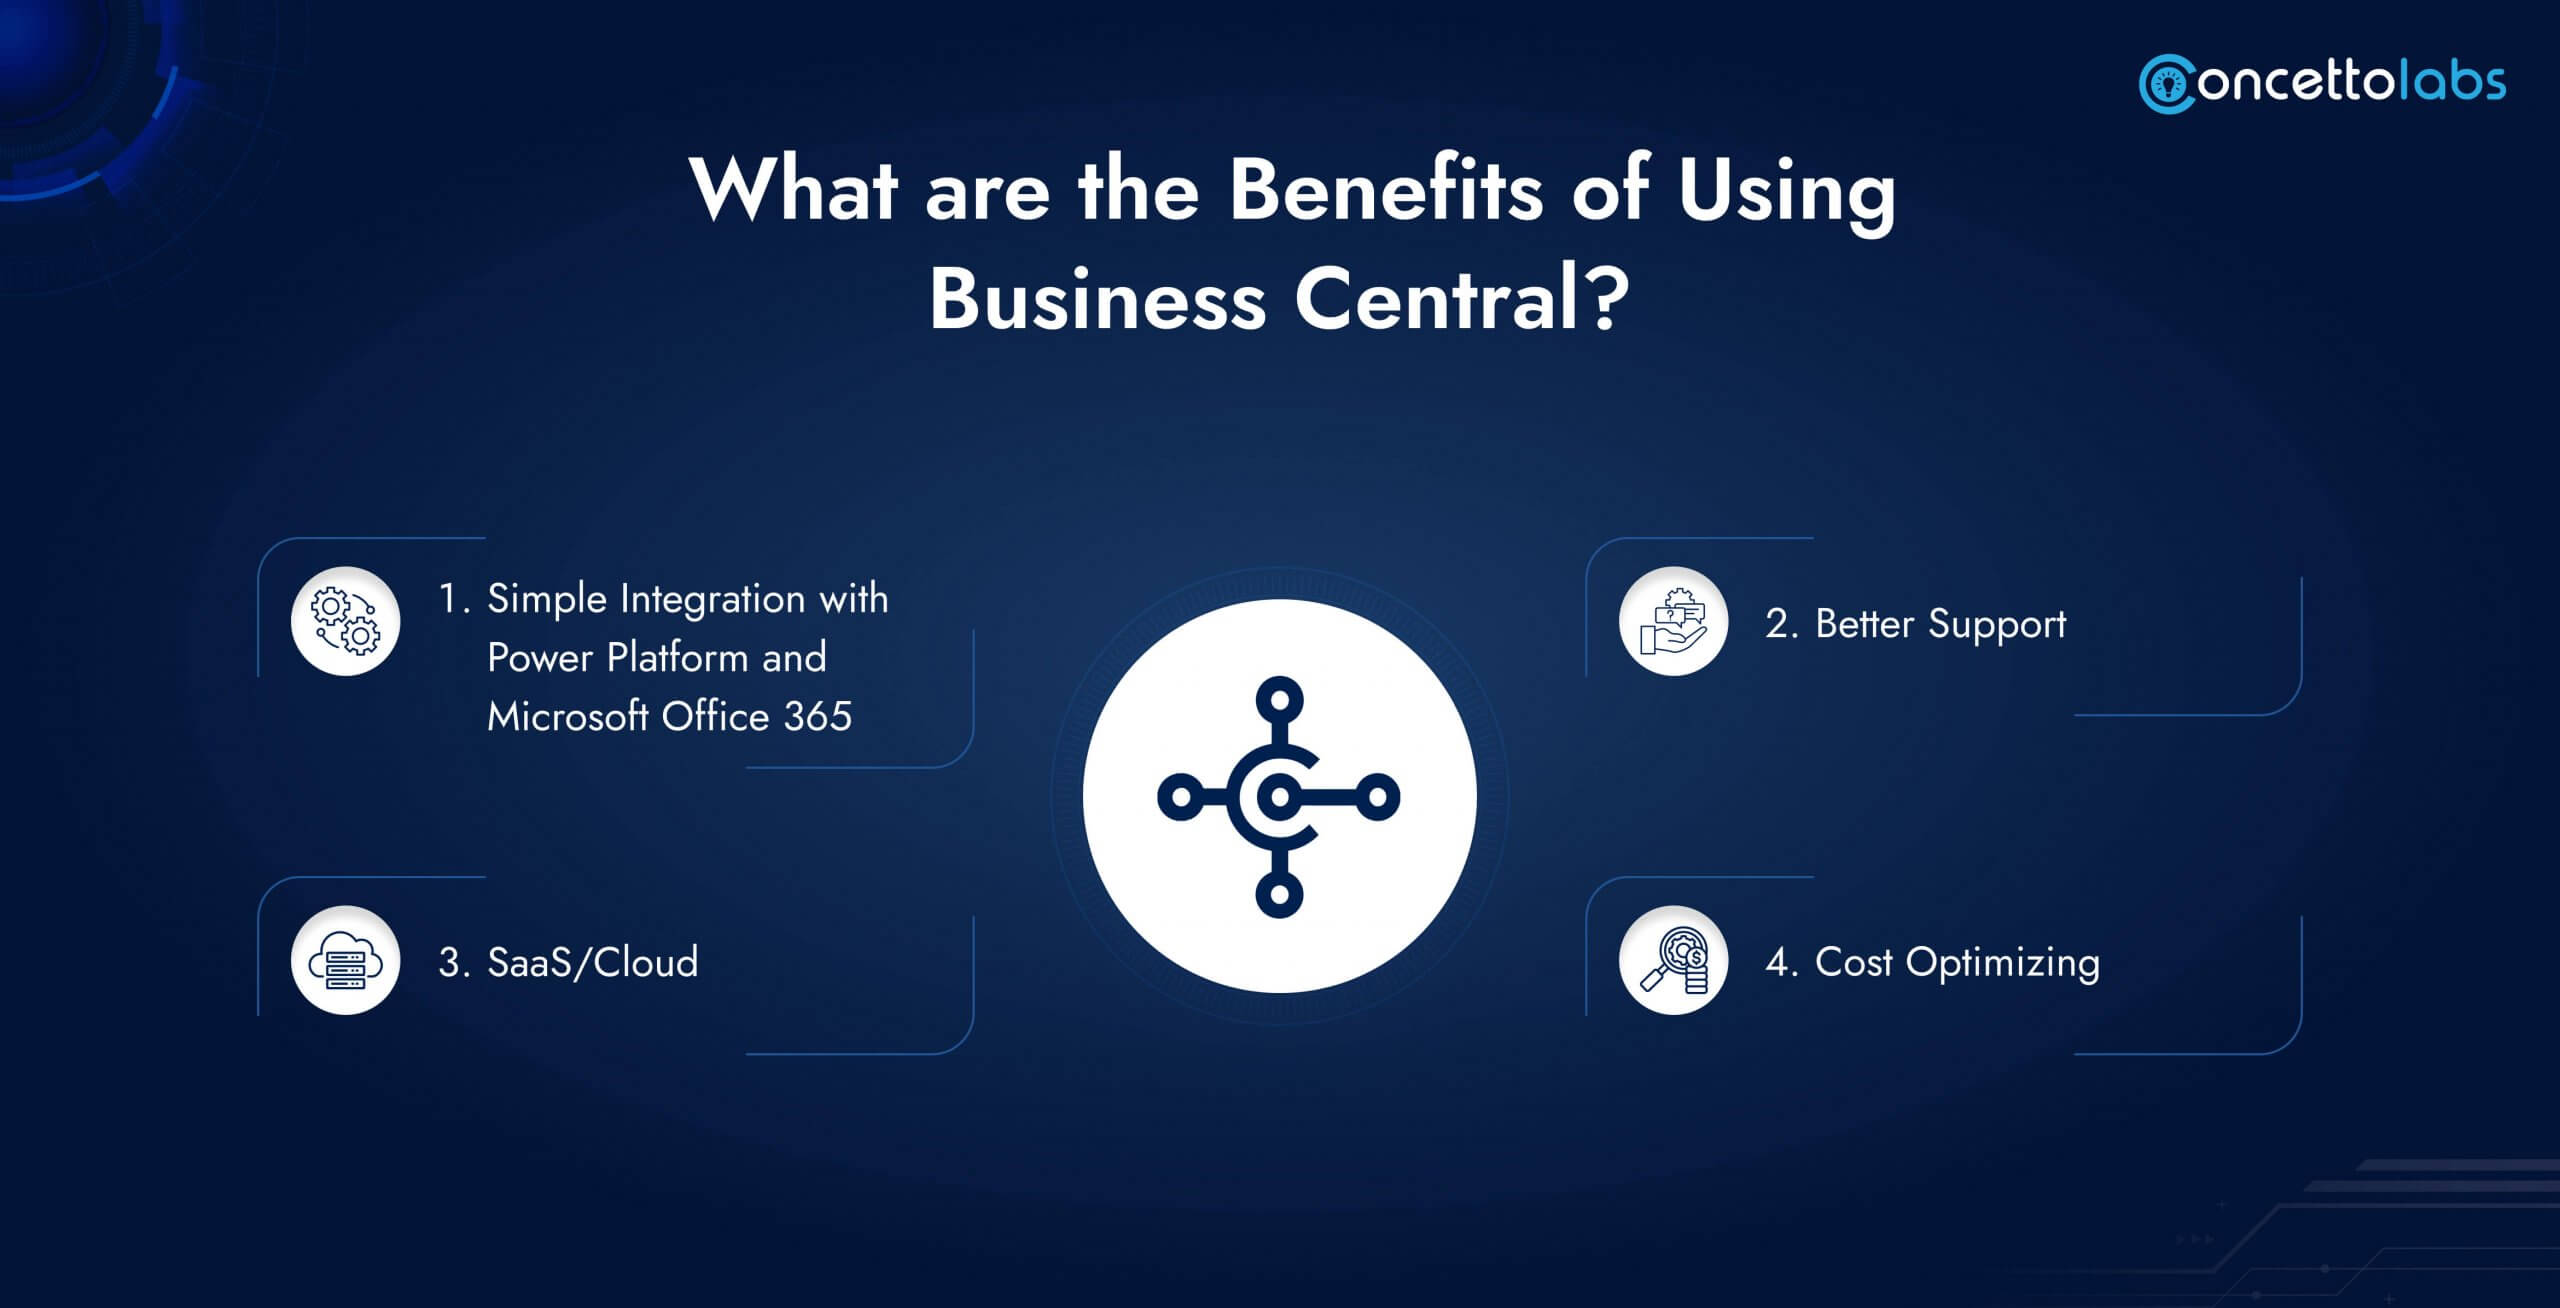 What are the Benefits of Using Business Central?